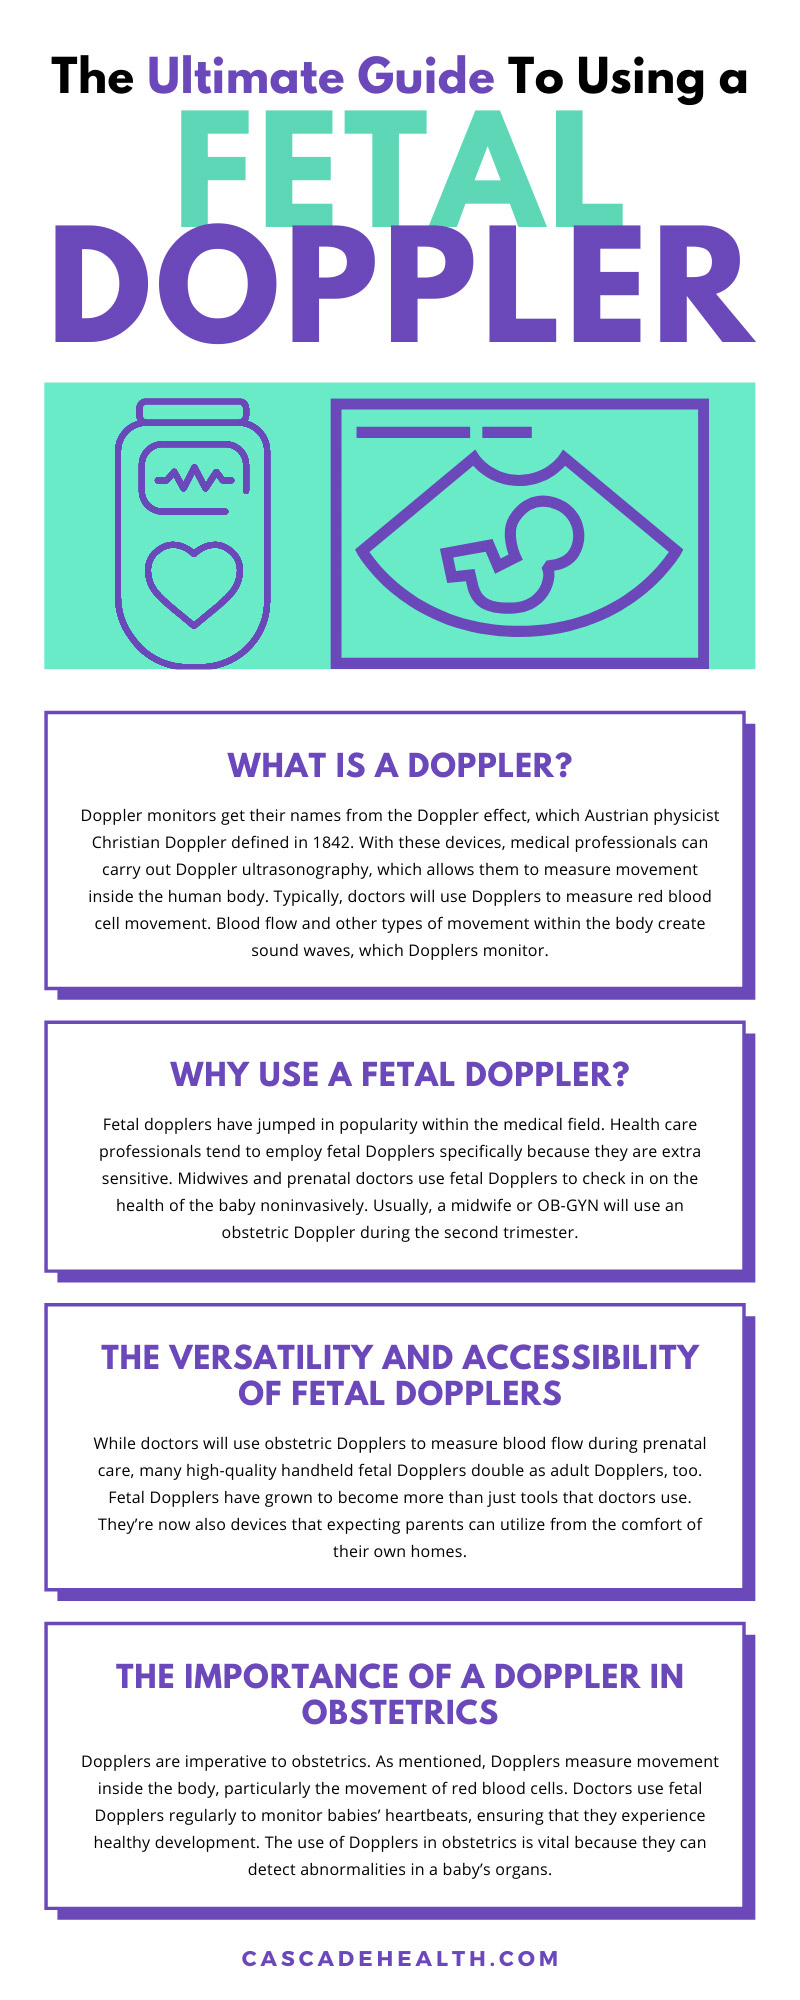 The Ultimate Guide To Using a Fetal Doppler